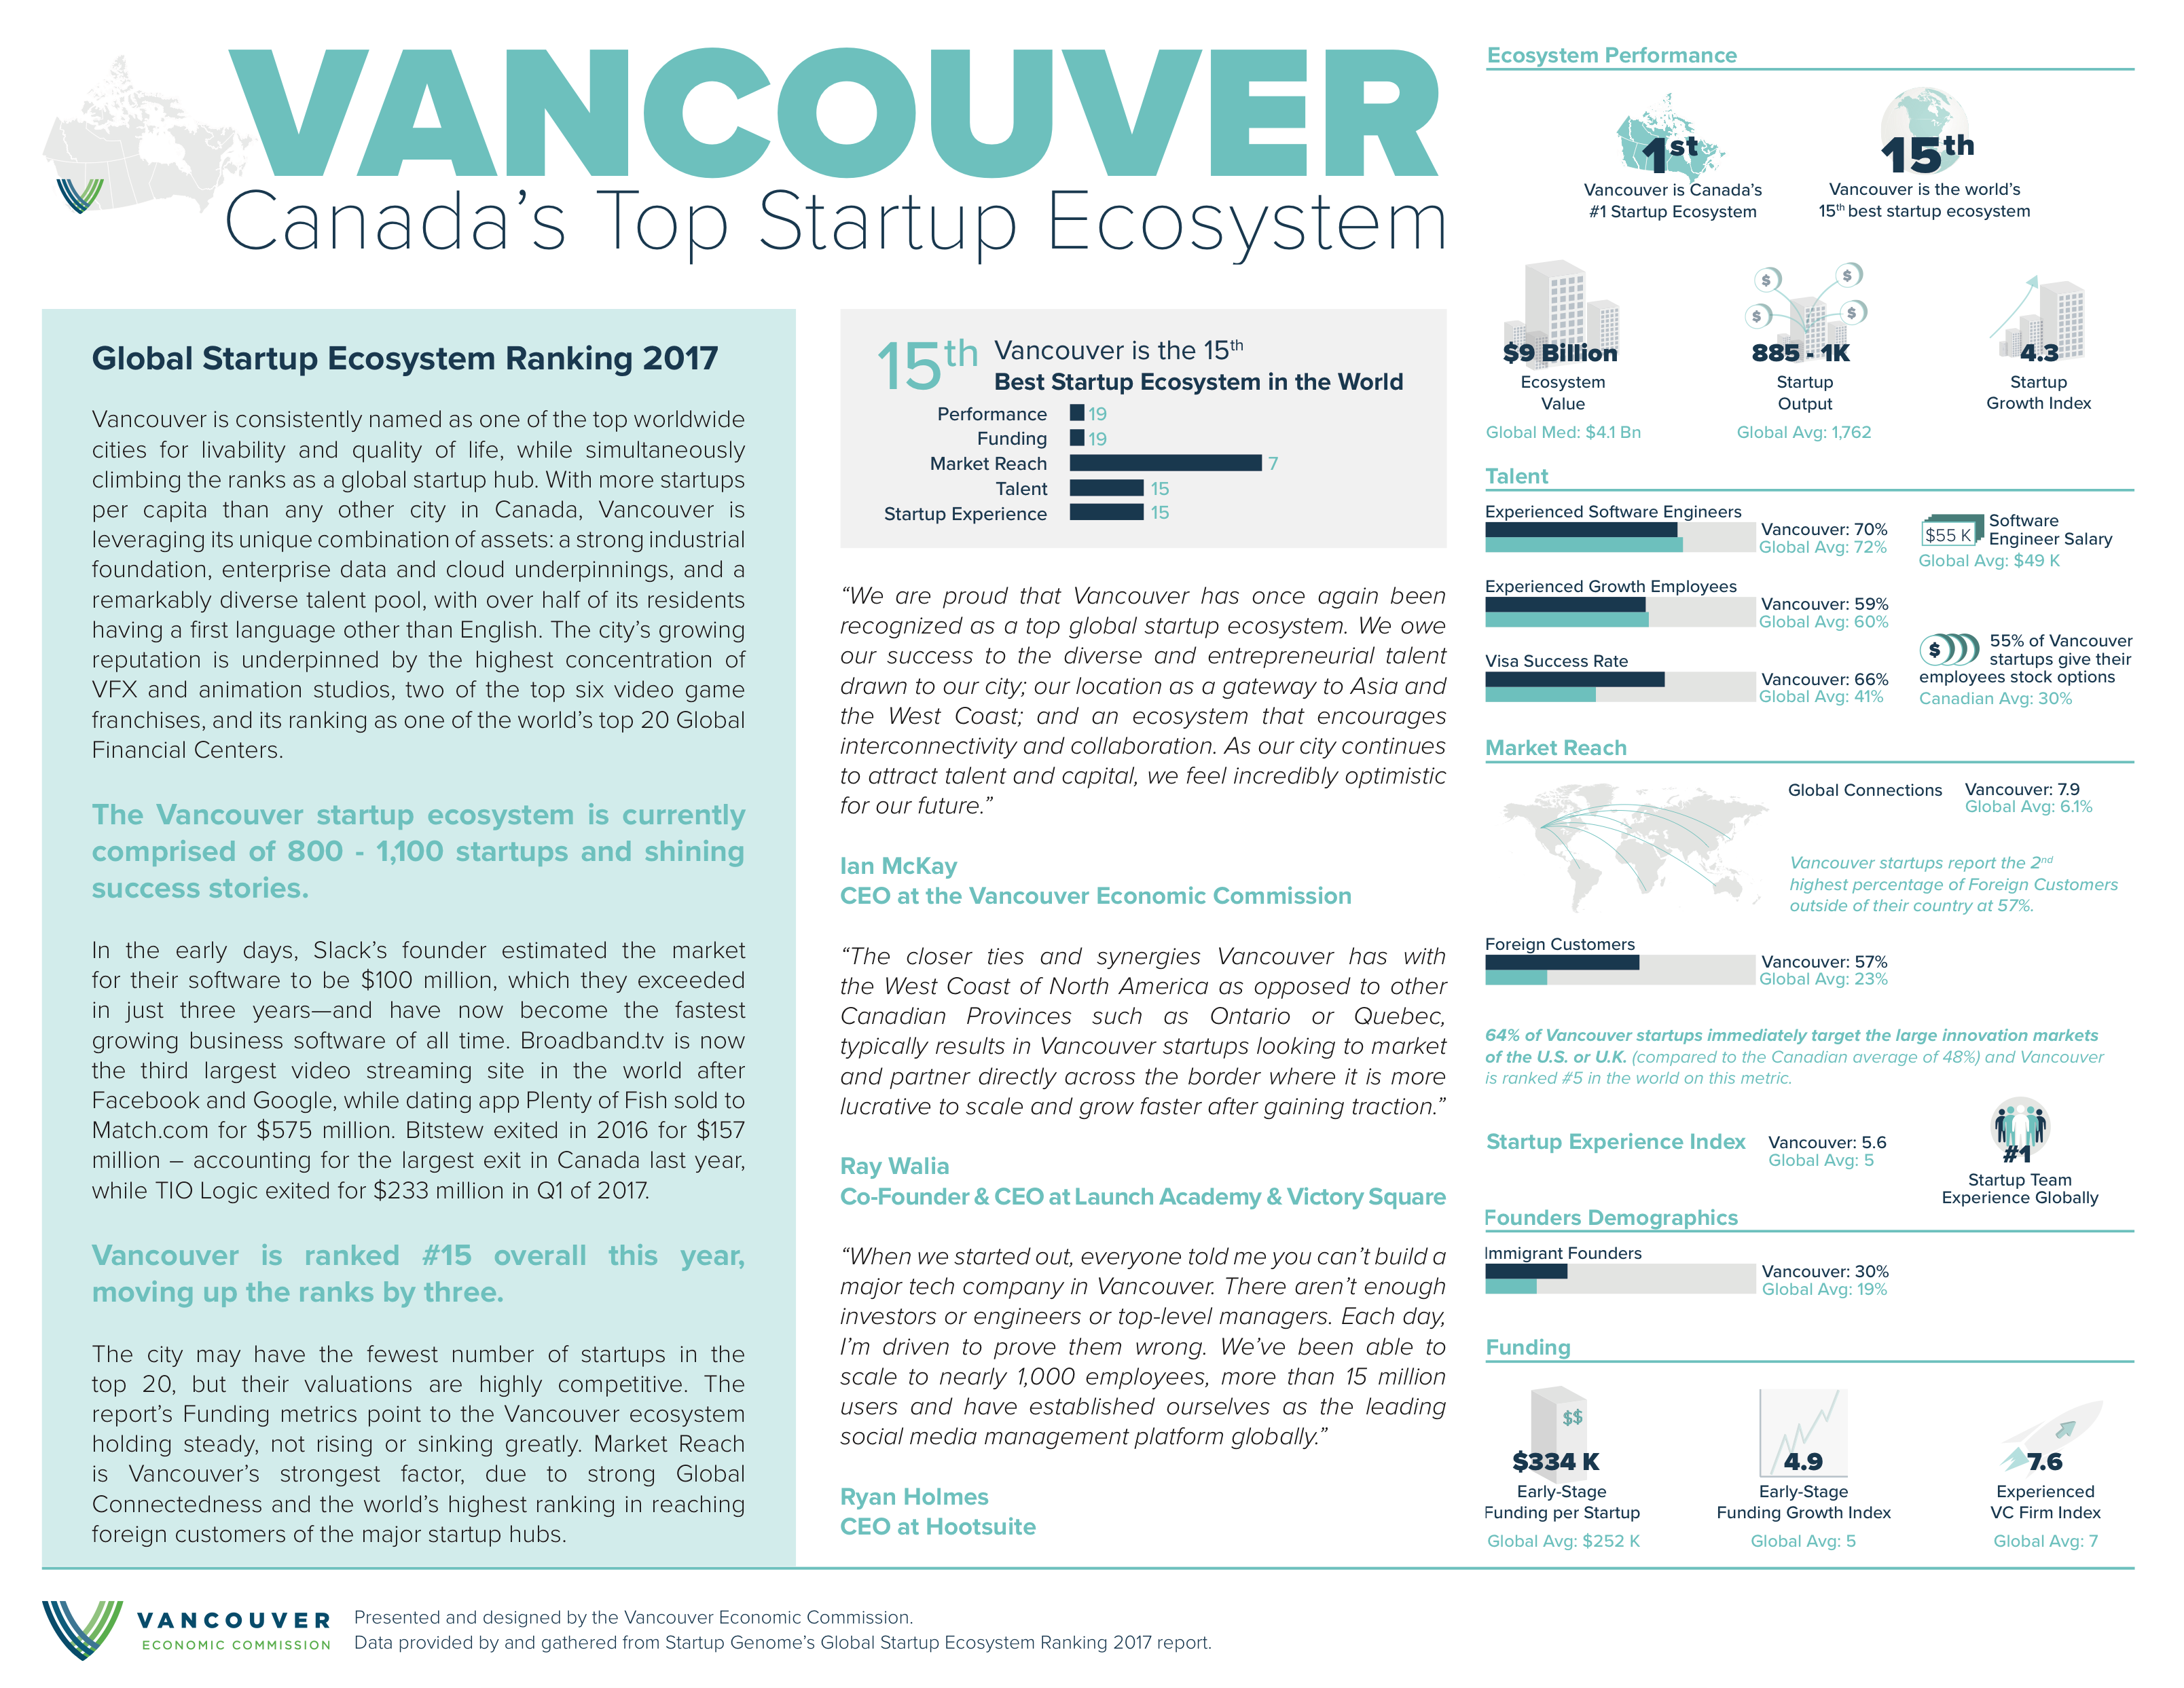 Vancouver is Canada's #1 Startup Ecosystem and 15th in the World - Infographic by the Vancouver Economic Commission - Data from Startup Genome 2017